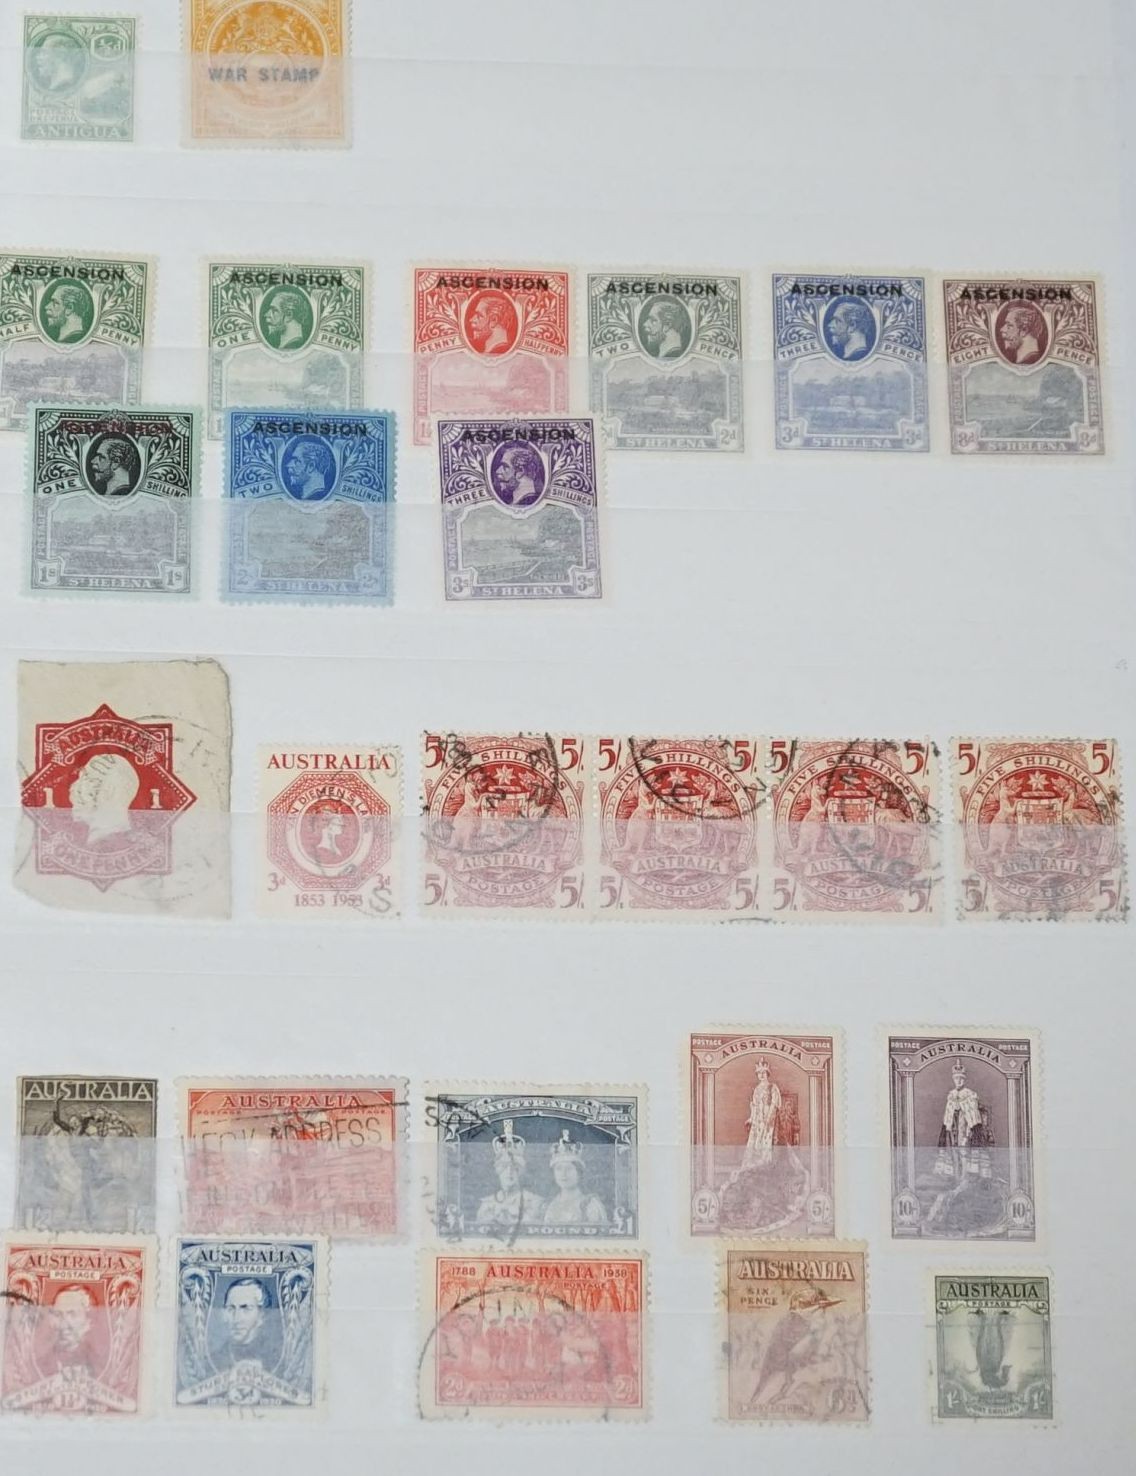 British Commonwealth stamps in stock, book with Ascension 1922 set of 9 mint, Bahamas 1884 £1 mint, Canada, Newfoundland, Ceylon, Malaya Straits Settlements 1898 $5 mint, mint blocks, few covers